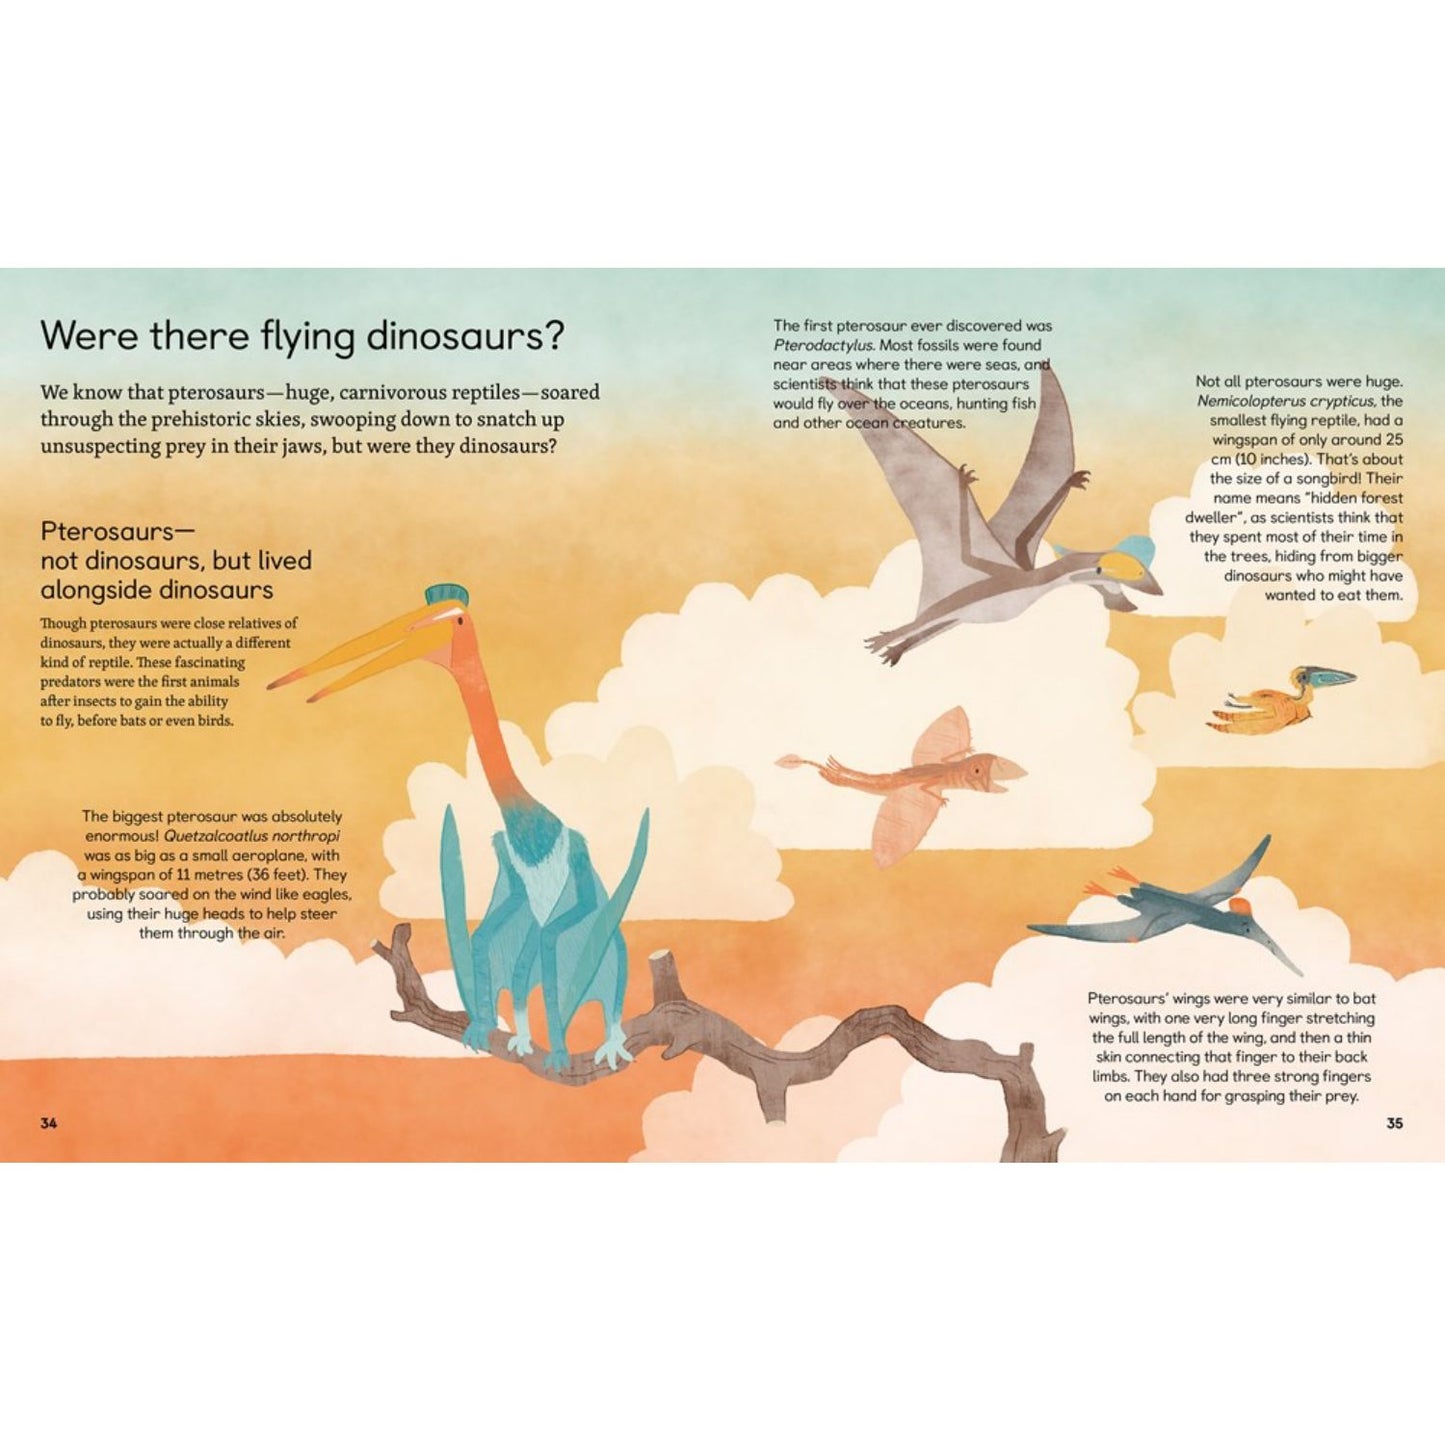 Ask Me About… Dinosaurs: Questions and Answers About the Prehistoric World | Children’s Book on Dinosaurs